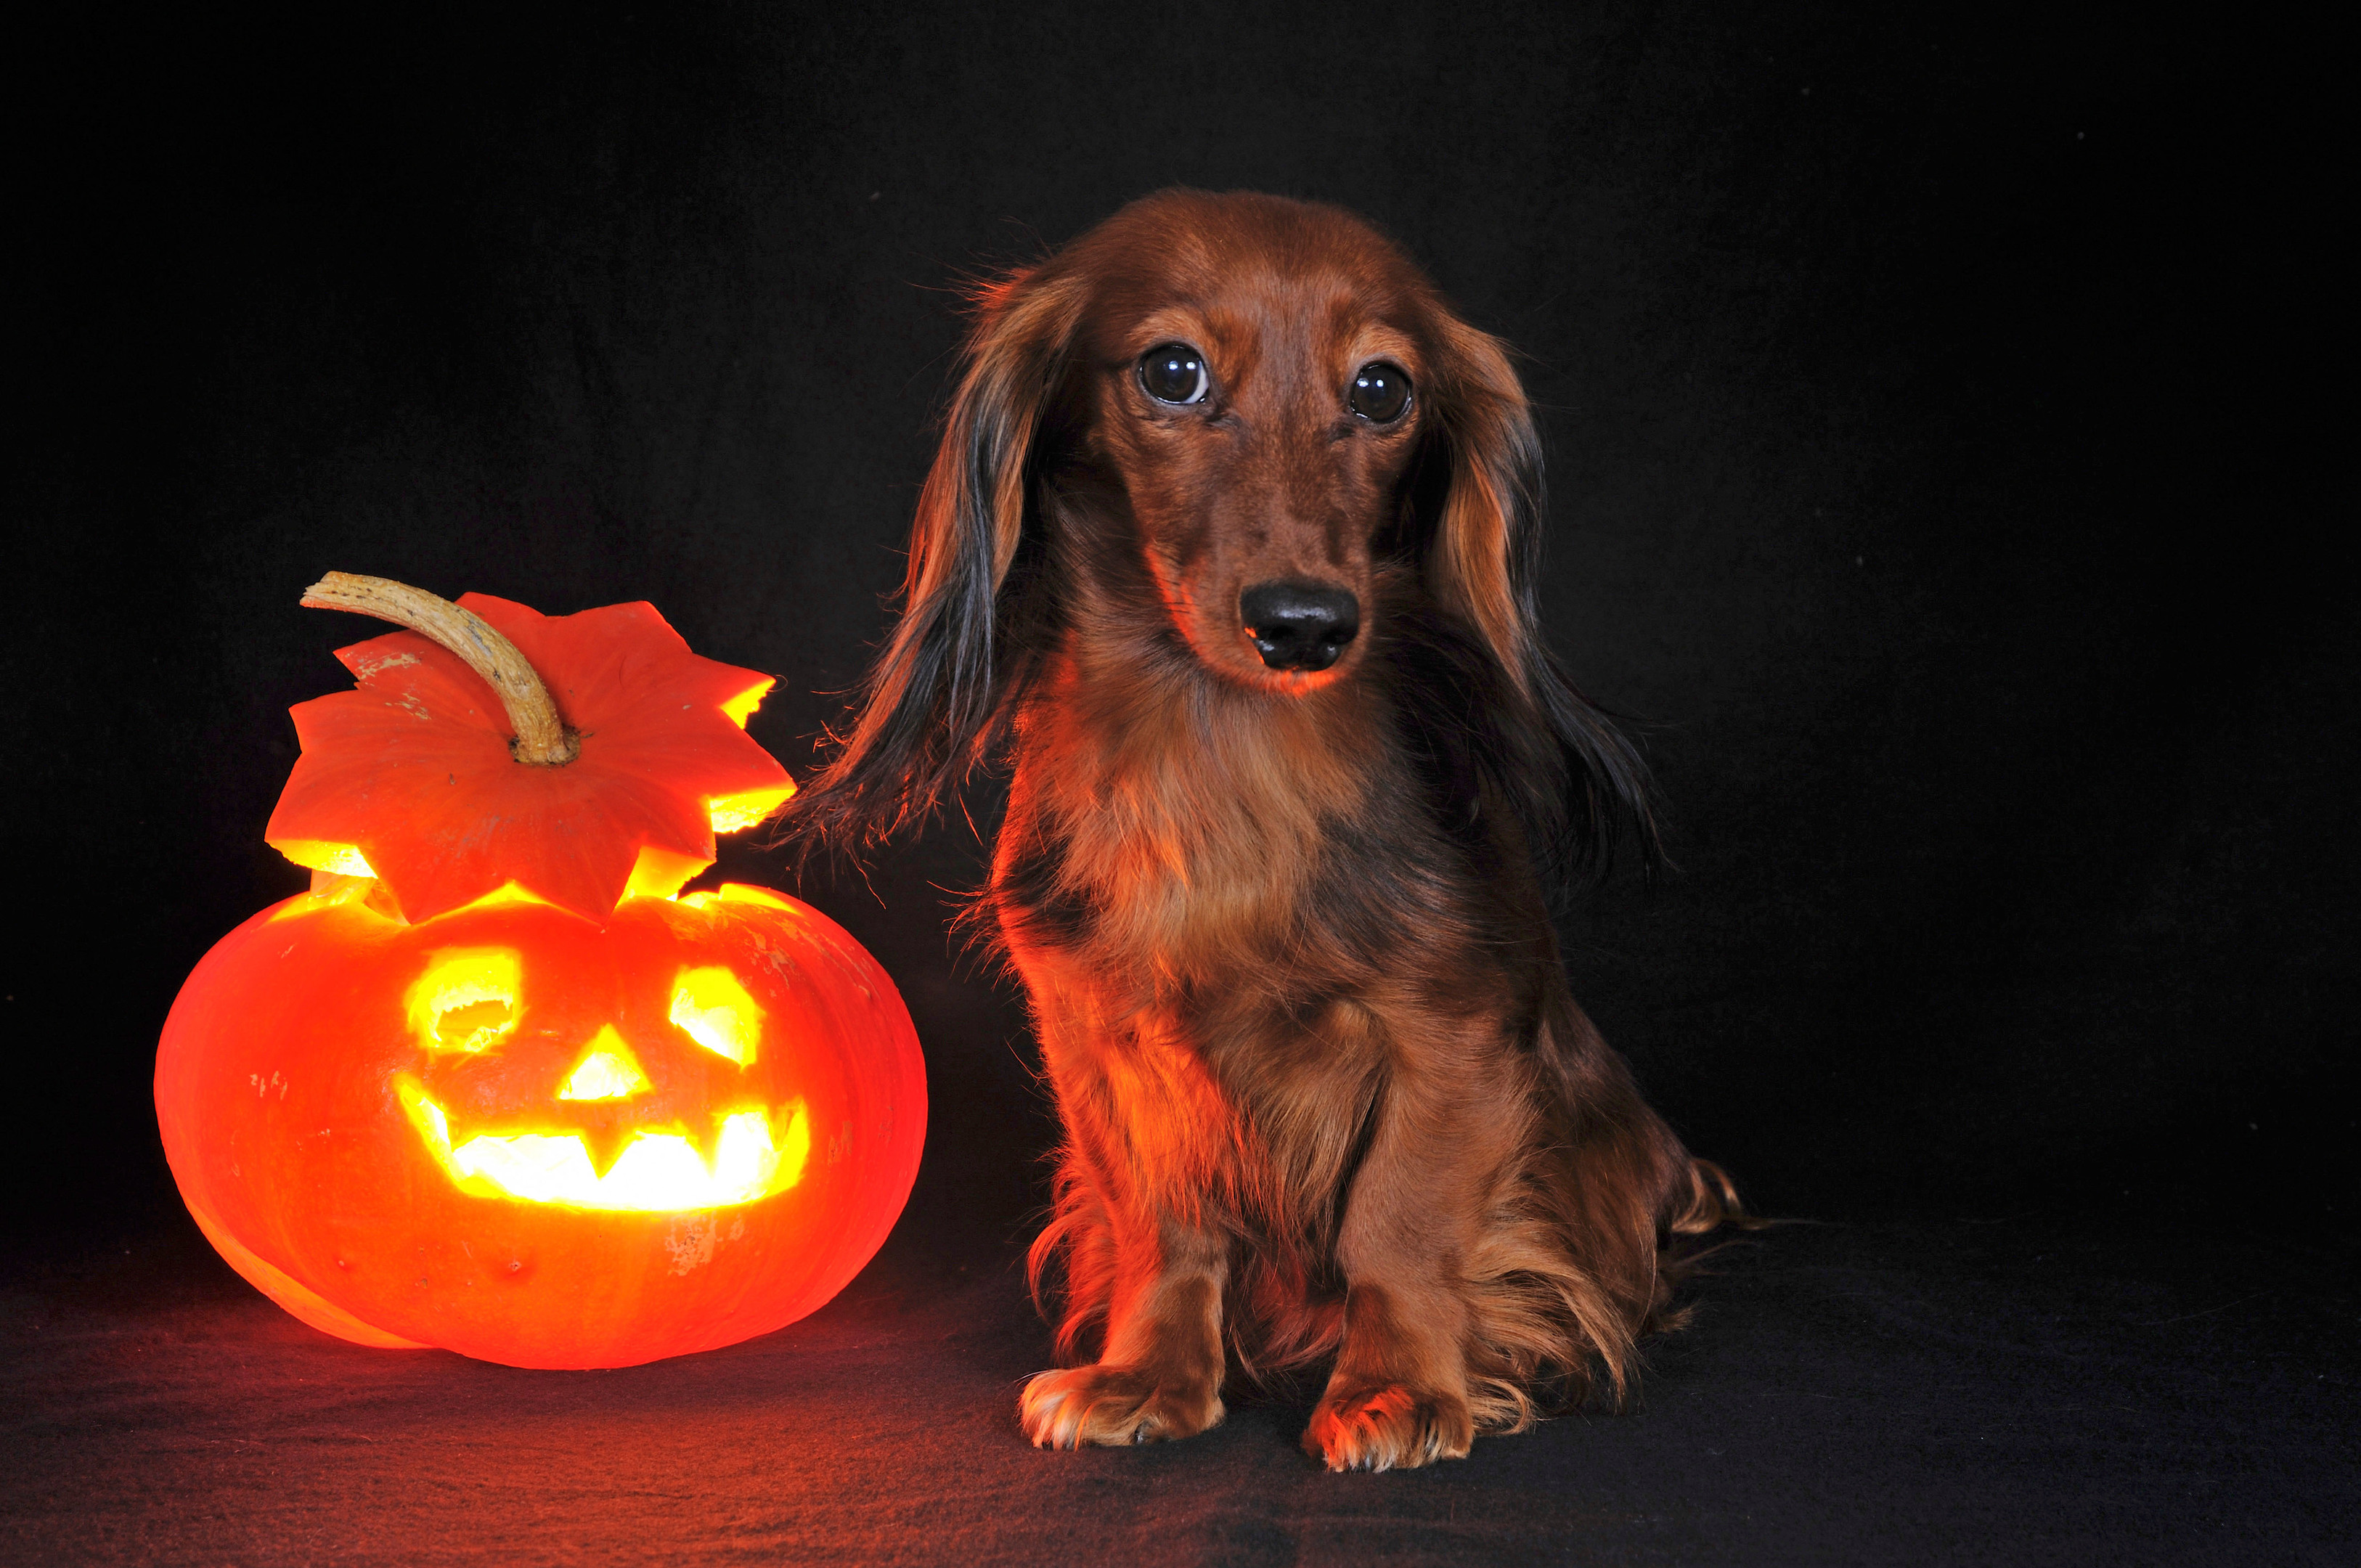 Pumpkins are fine. But stay away from the chocolate, Fido!